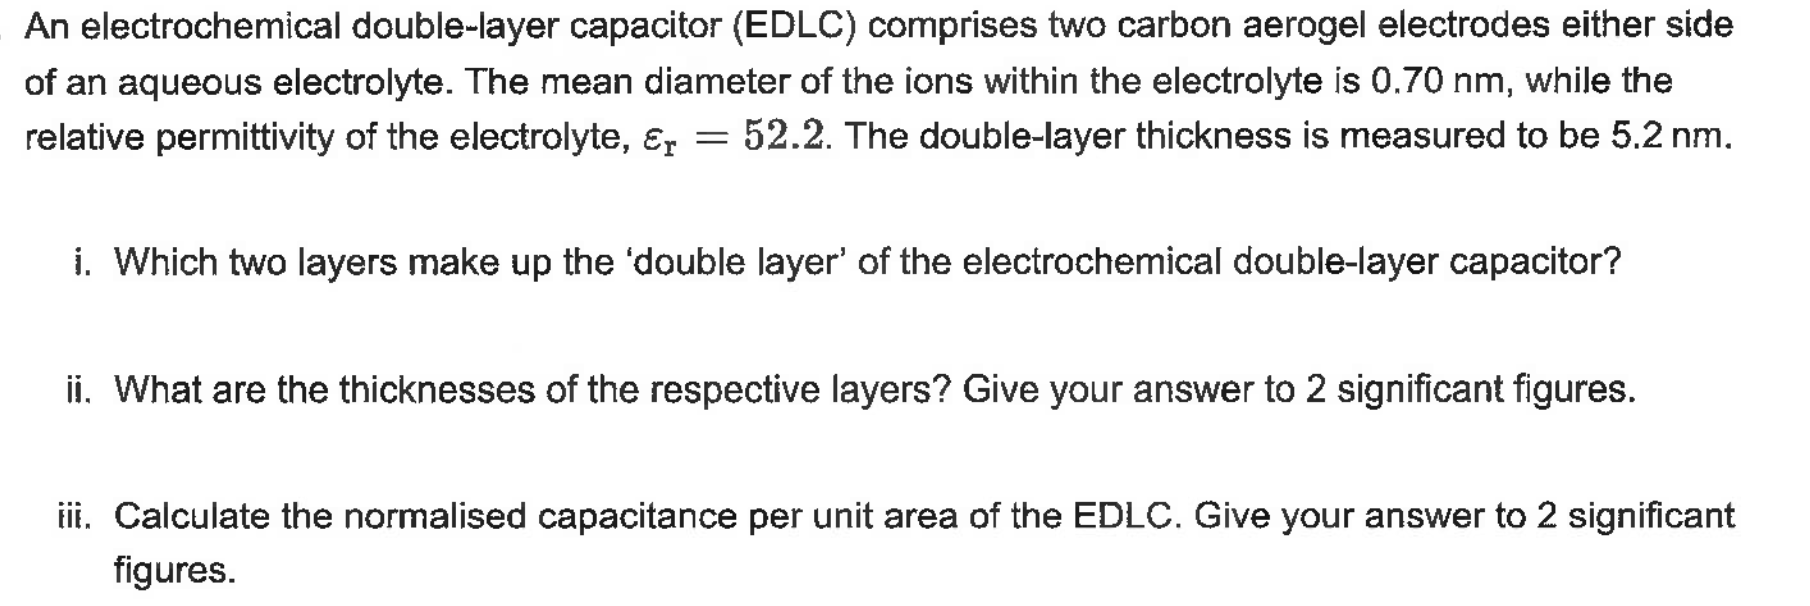 Electrochemical Double Layer - an overview